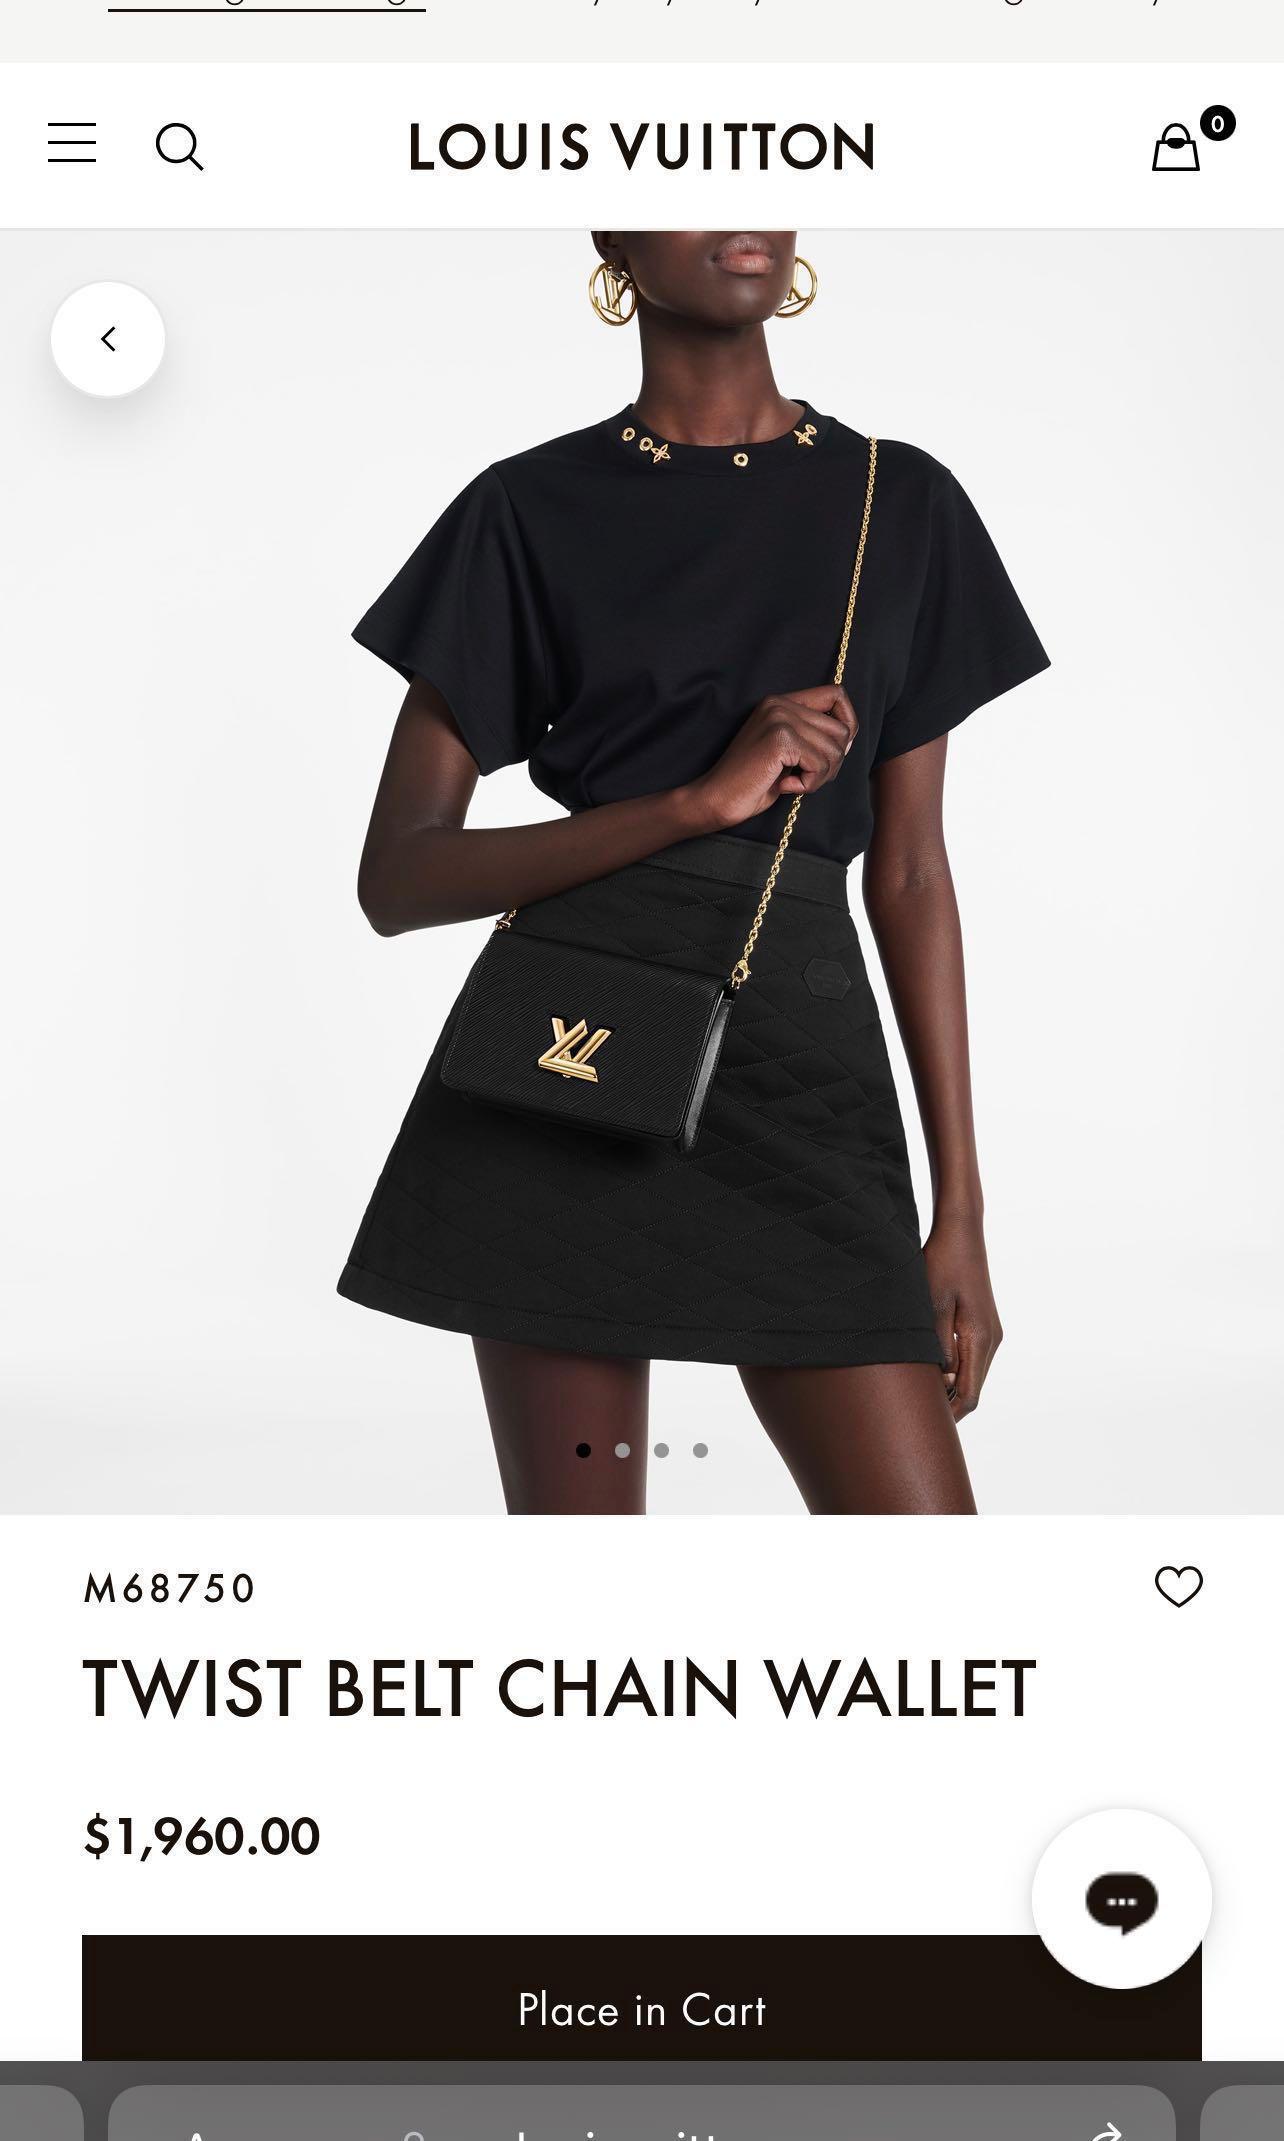 Thoughts on the new twist belt chain wallet?